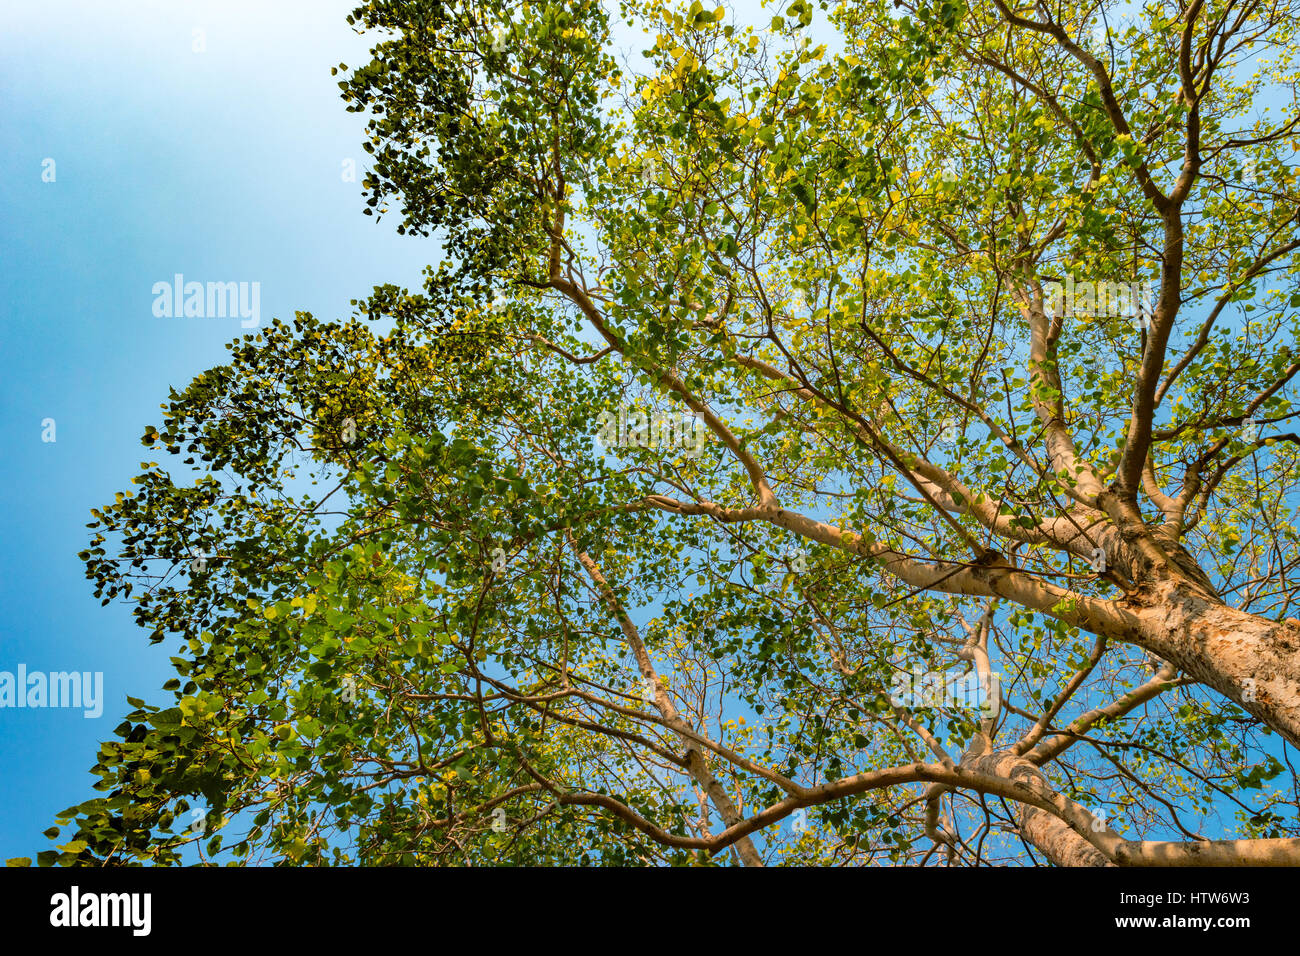 Giant stem of pterocarpus indicus tree against sun on summer day. Stock Photo